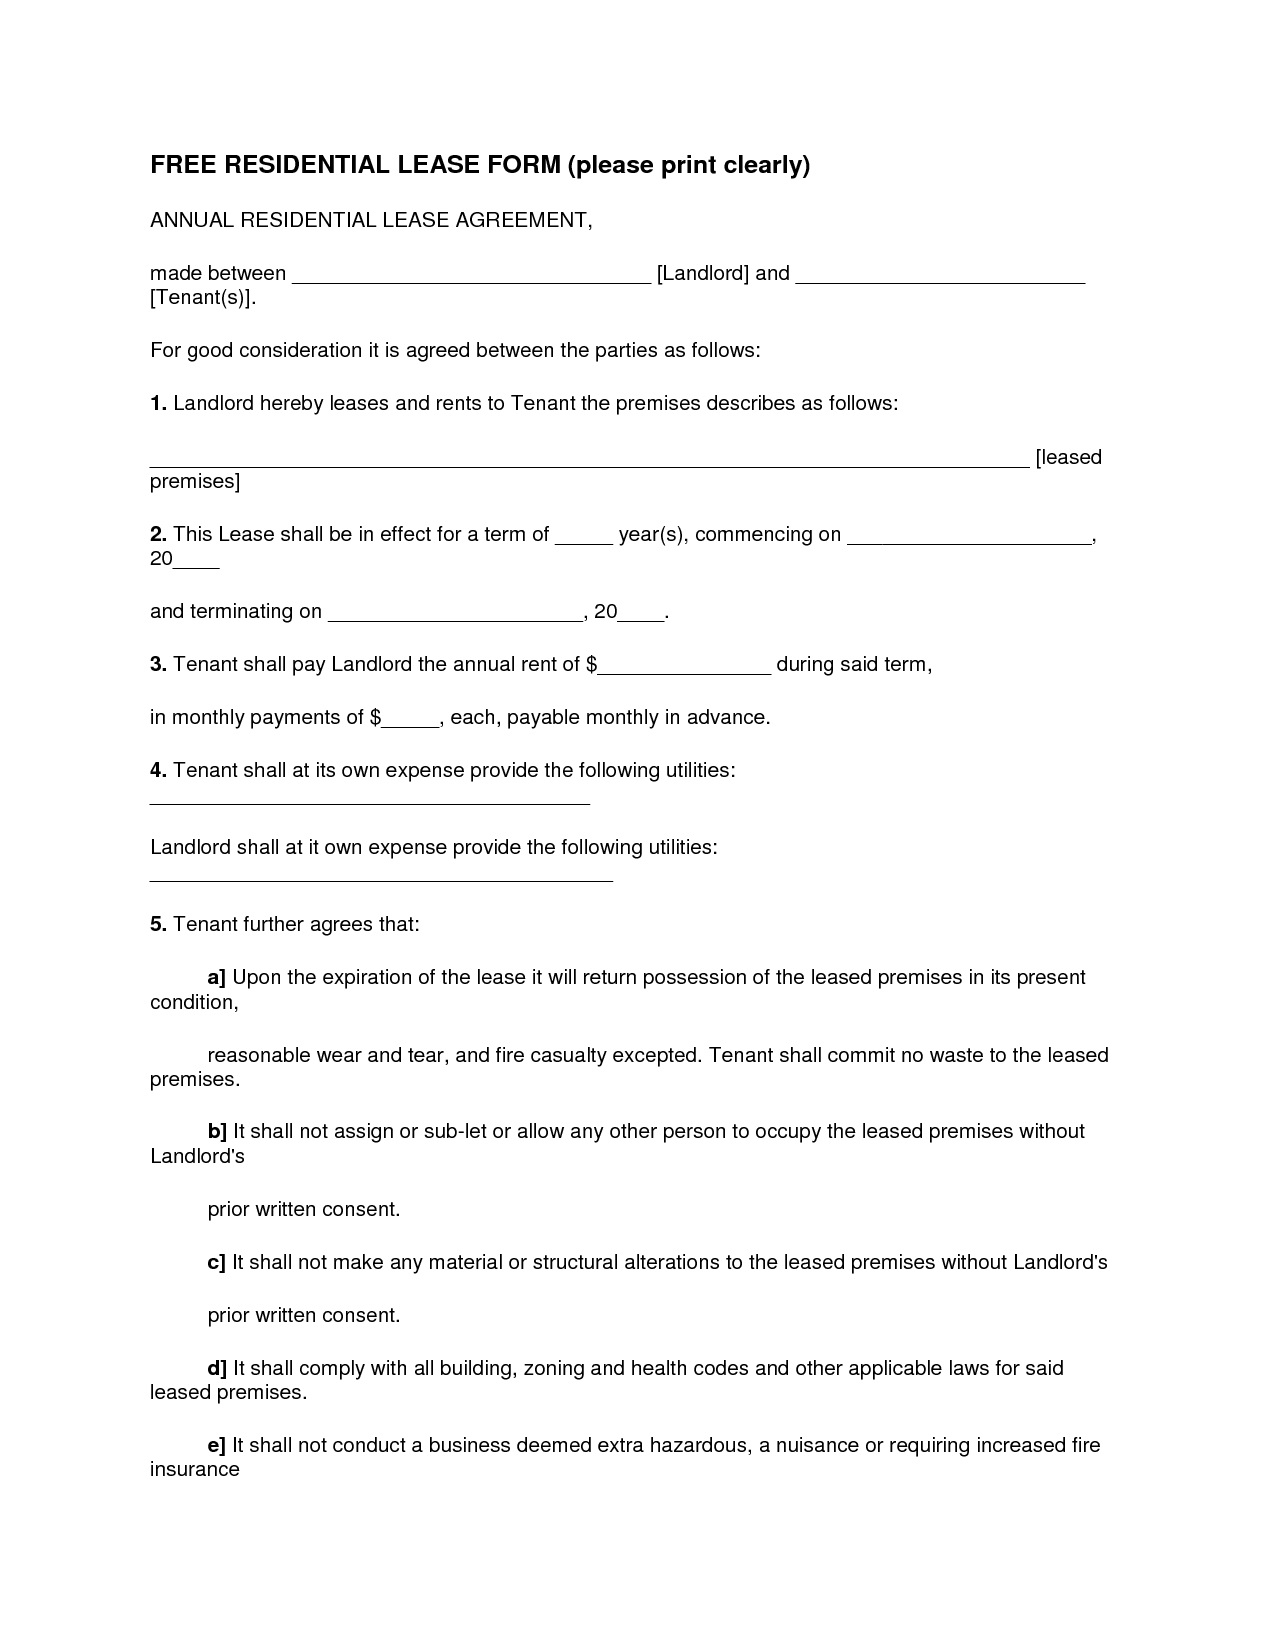 Free Printable Lease Agreement Template Editable Residential Lease Agreement 114870 Free Printable Lease And